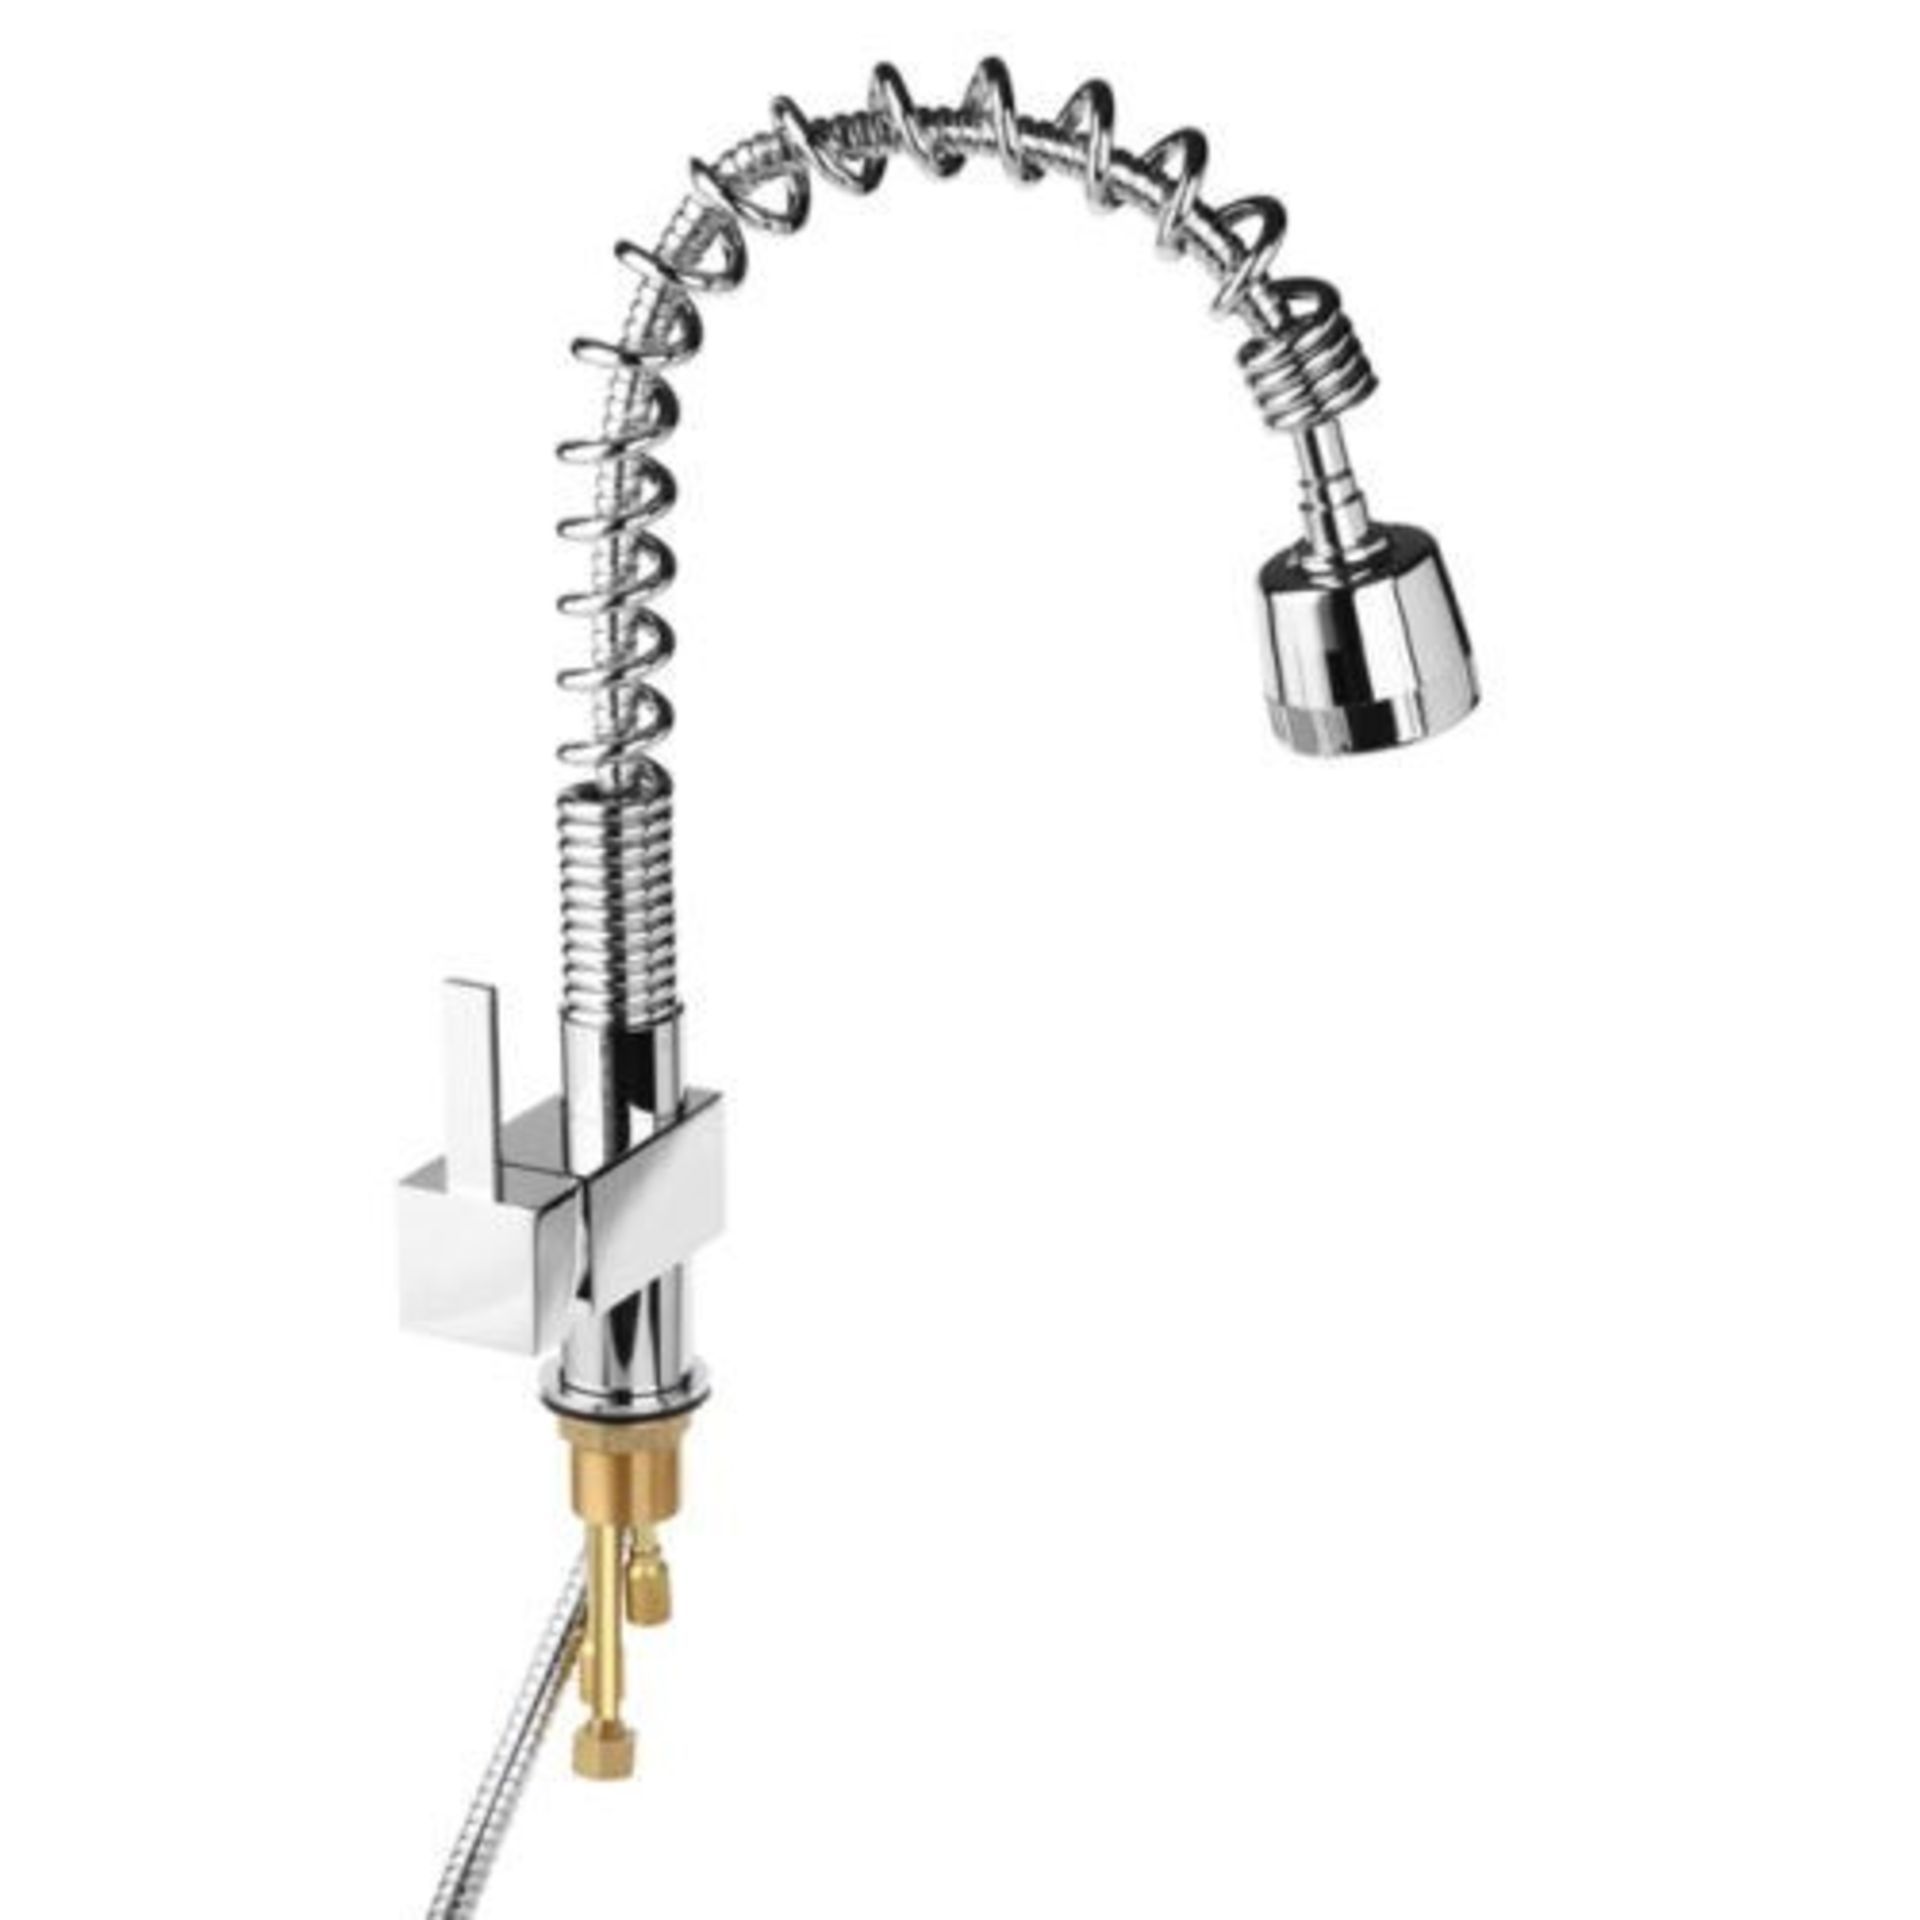 NEW & BOXED Maddie Brushed Chrome Monobloc Kitchen Tap Swivel Pull Out Spray Mixer. RRP £219.99. - Image 2 of 2